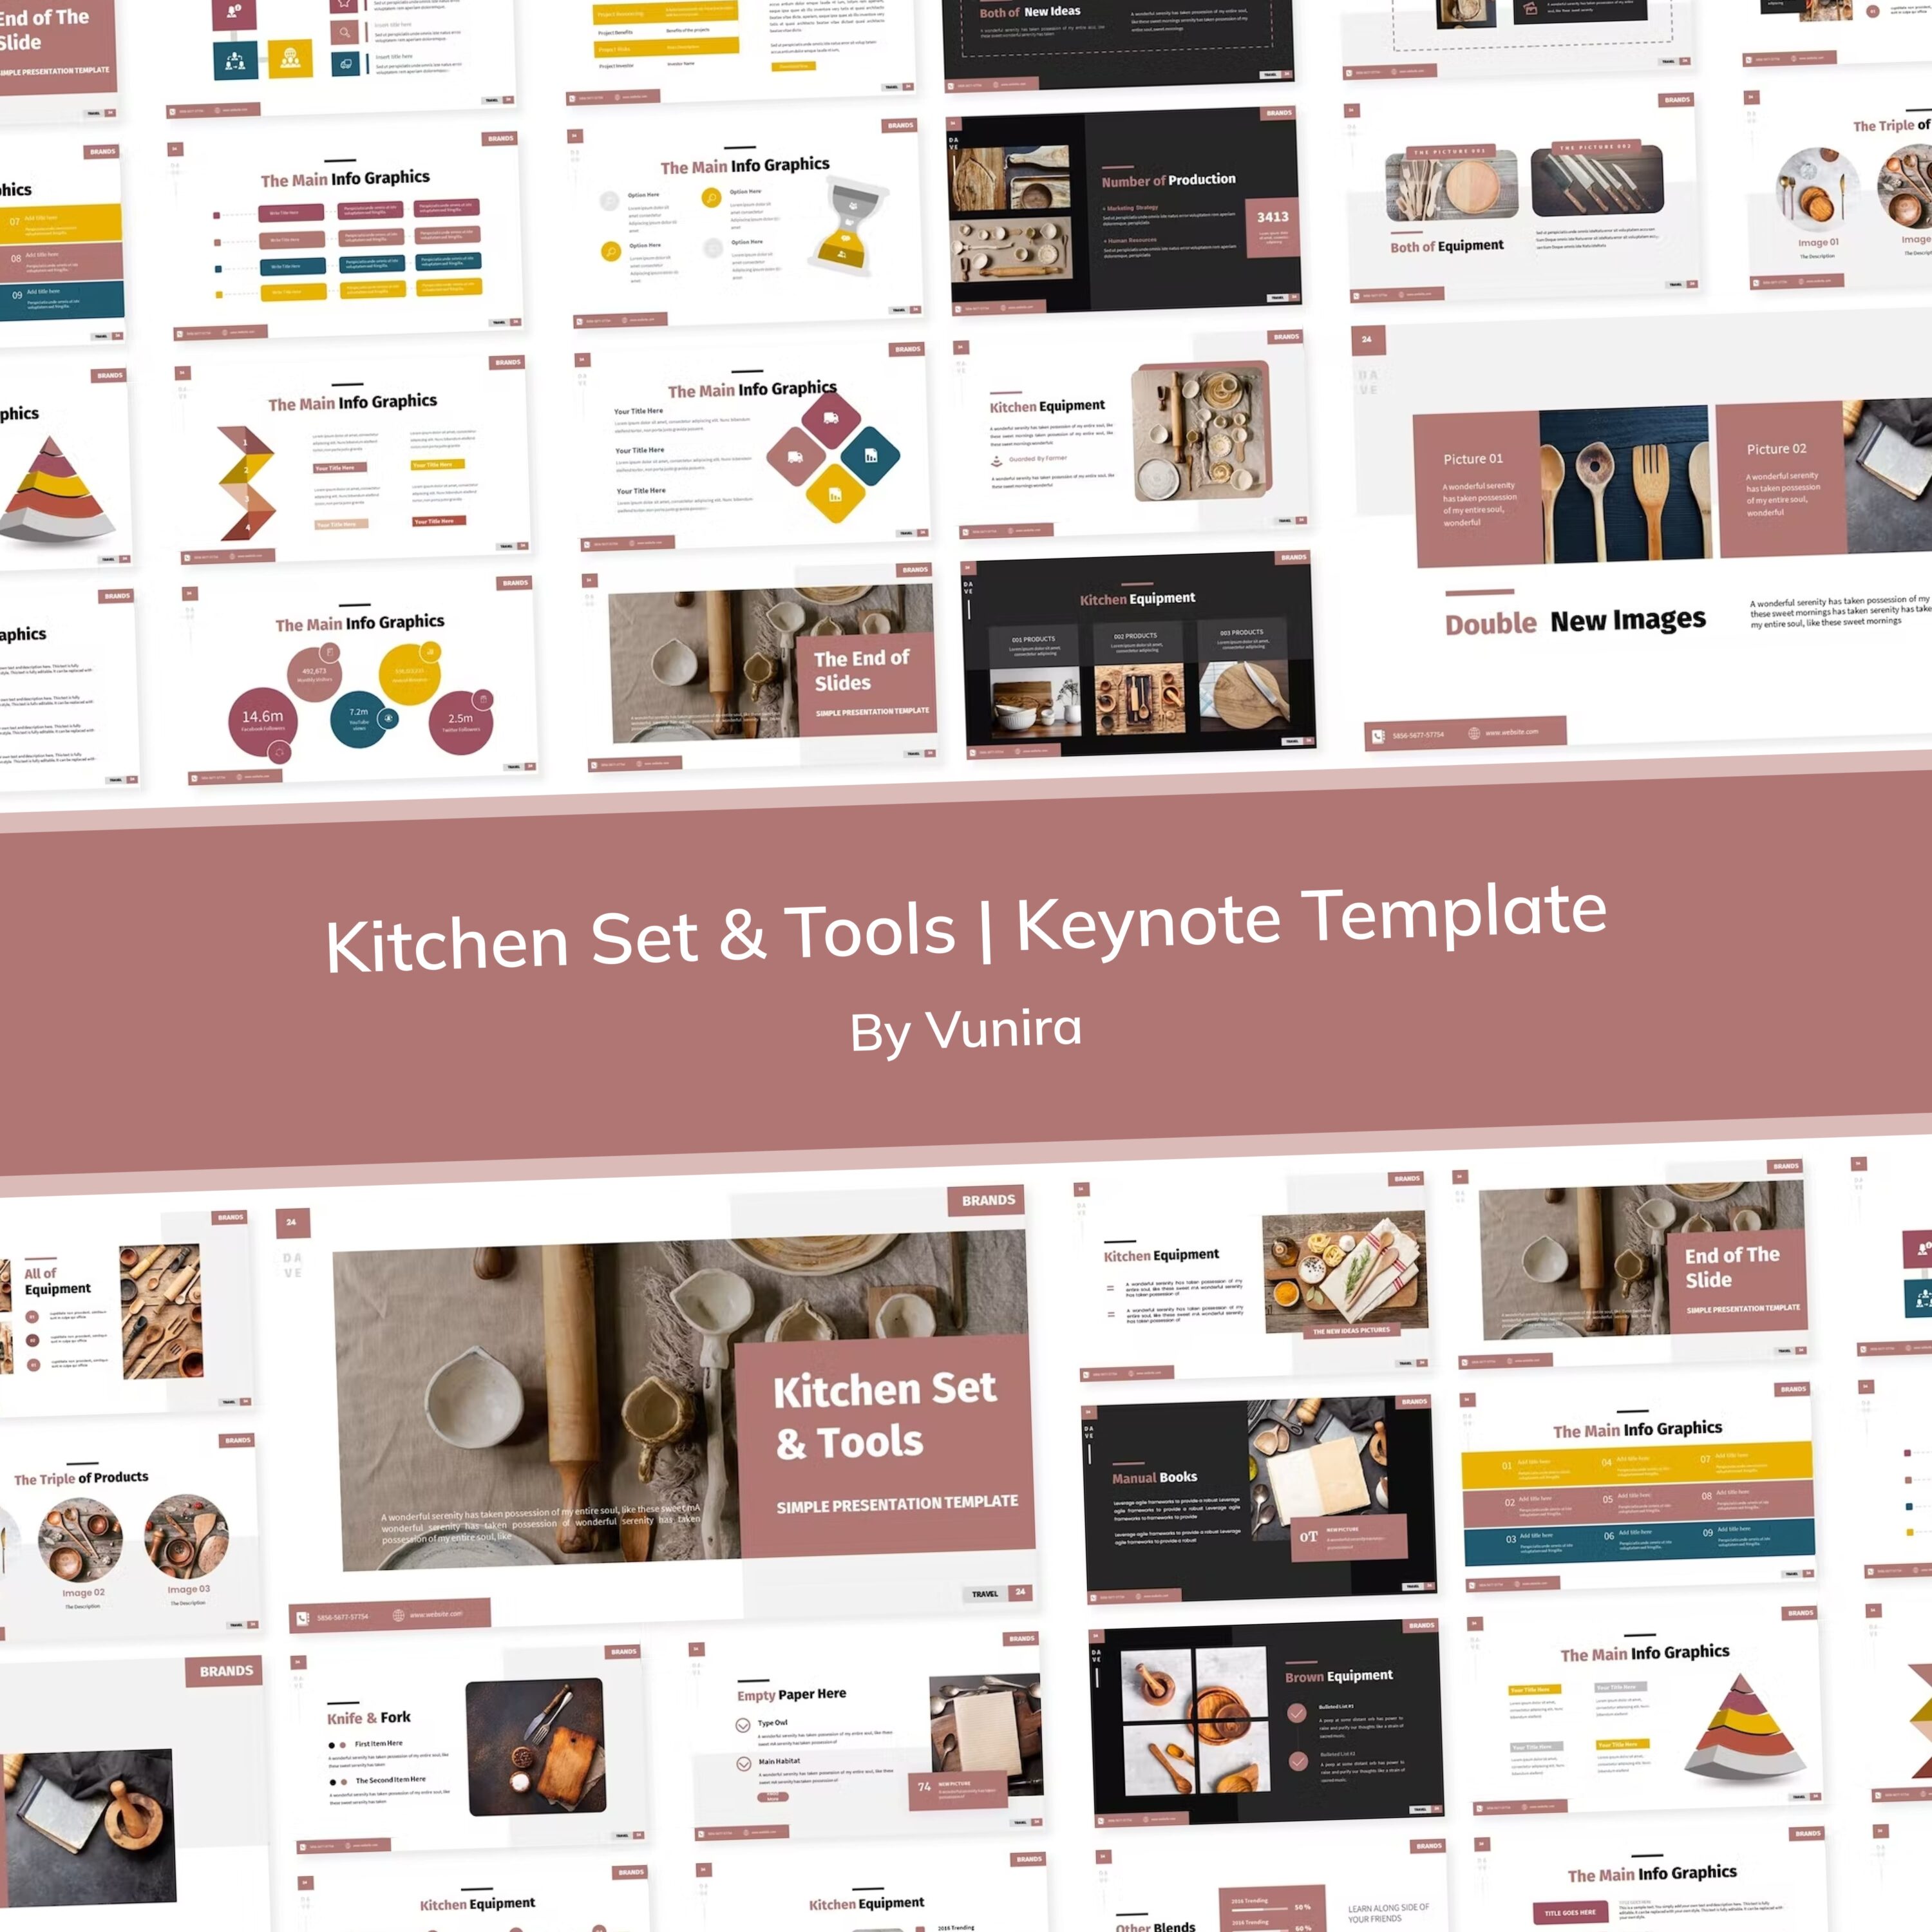 Preview kitchen set tools keynote template.